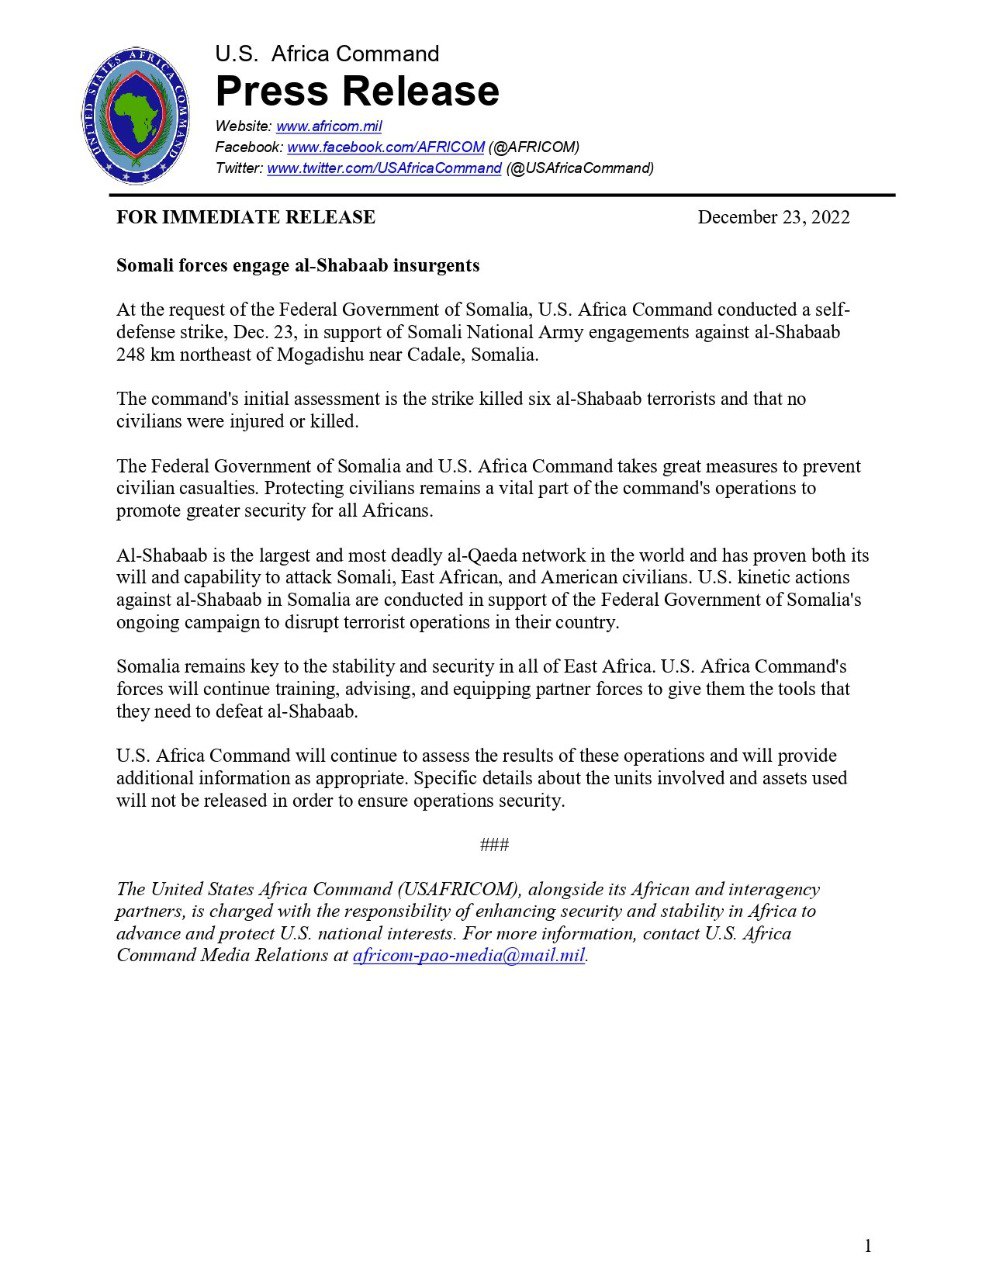 (Statement) United States Military Announced the Elimination of Six al-Shabaab Militants in Adele, Middle Shabelle Province, Somalia - 23 December 2022